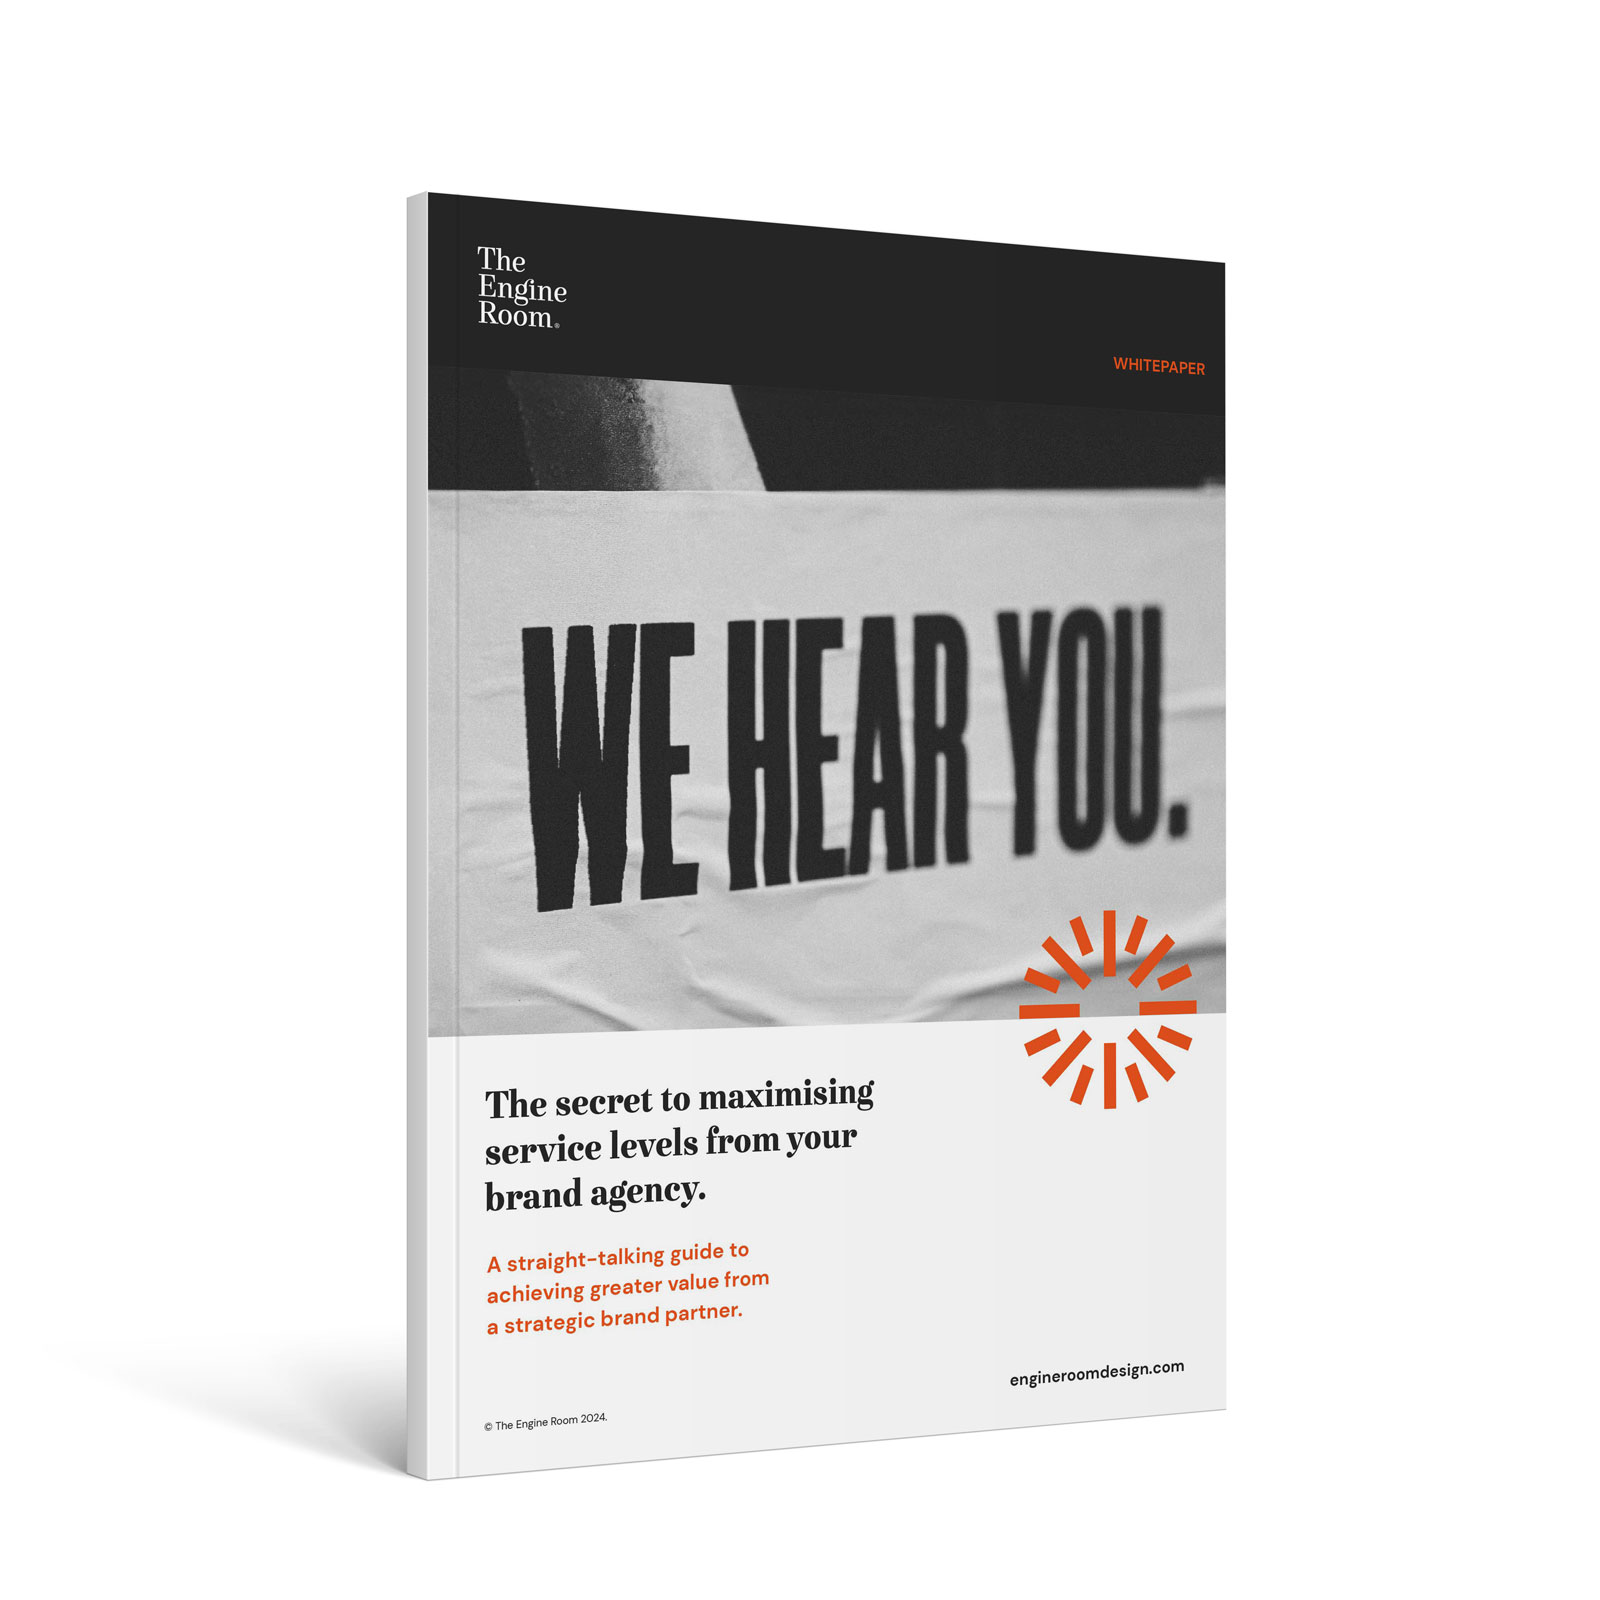 Download your copy of our Whitepaper. The secret to maximising service levels from your brand agency.